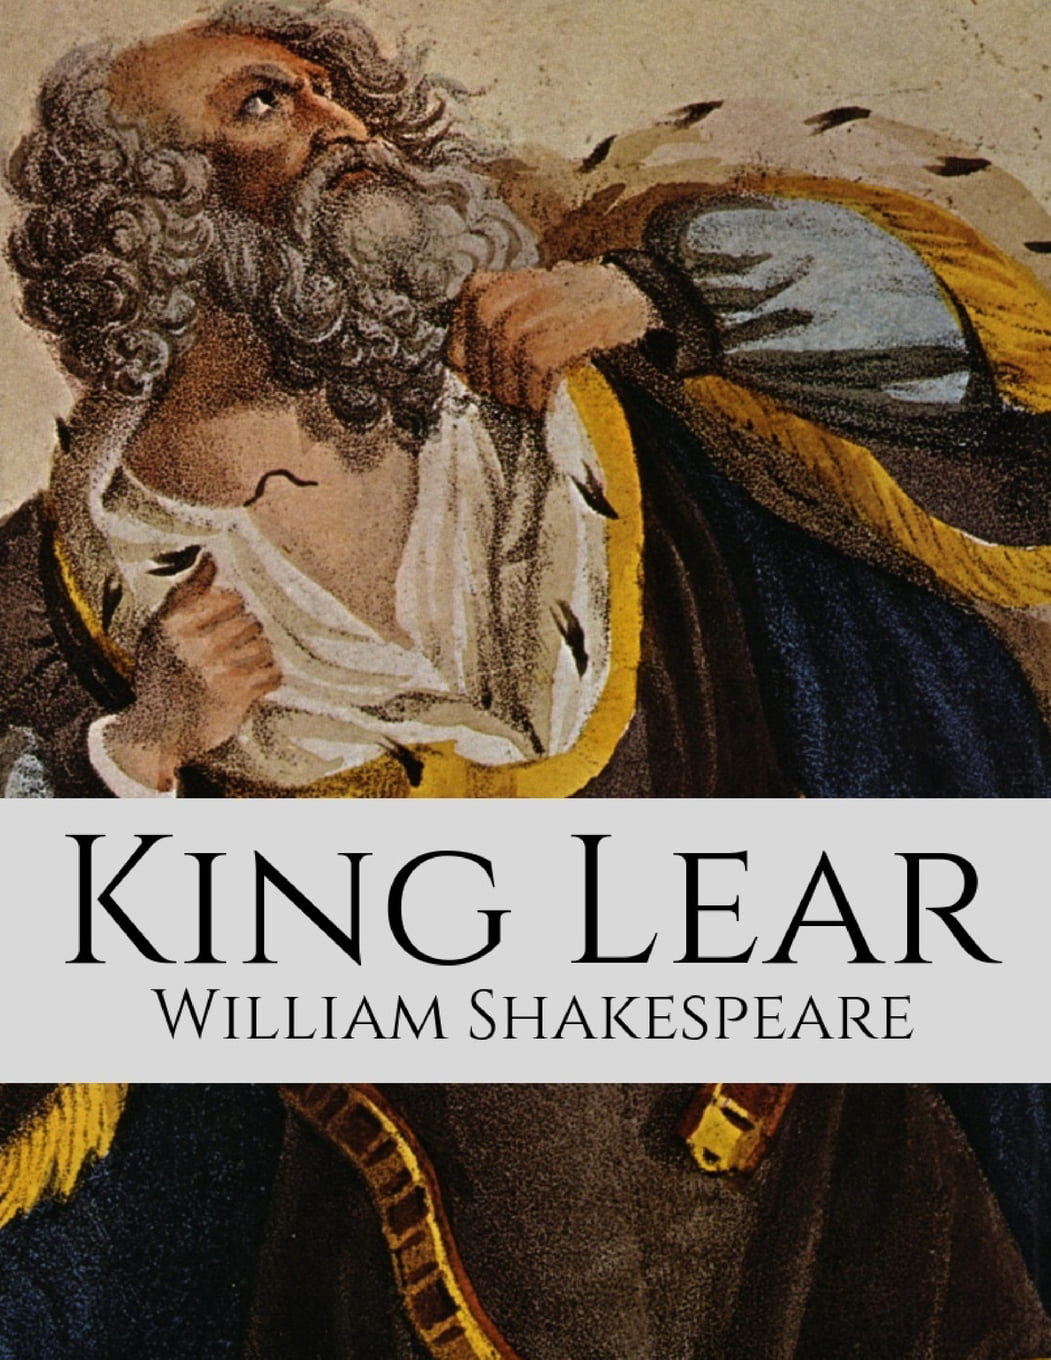 book review on king lear